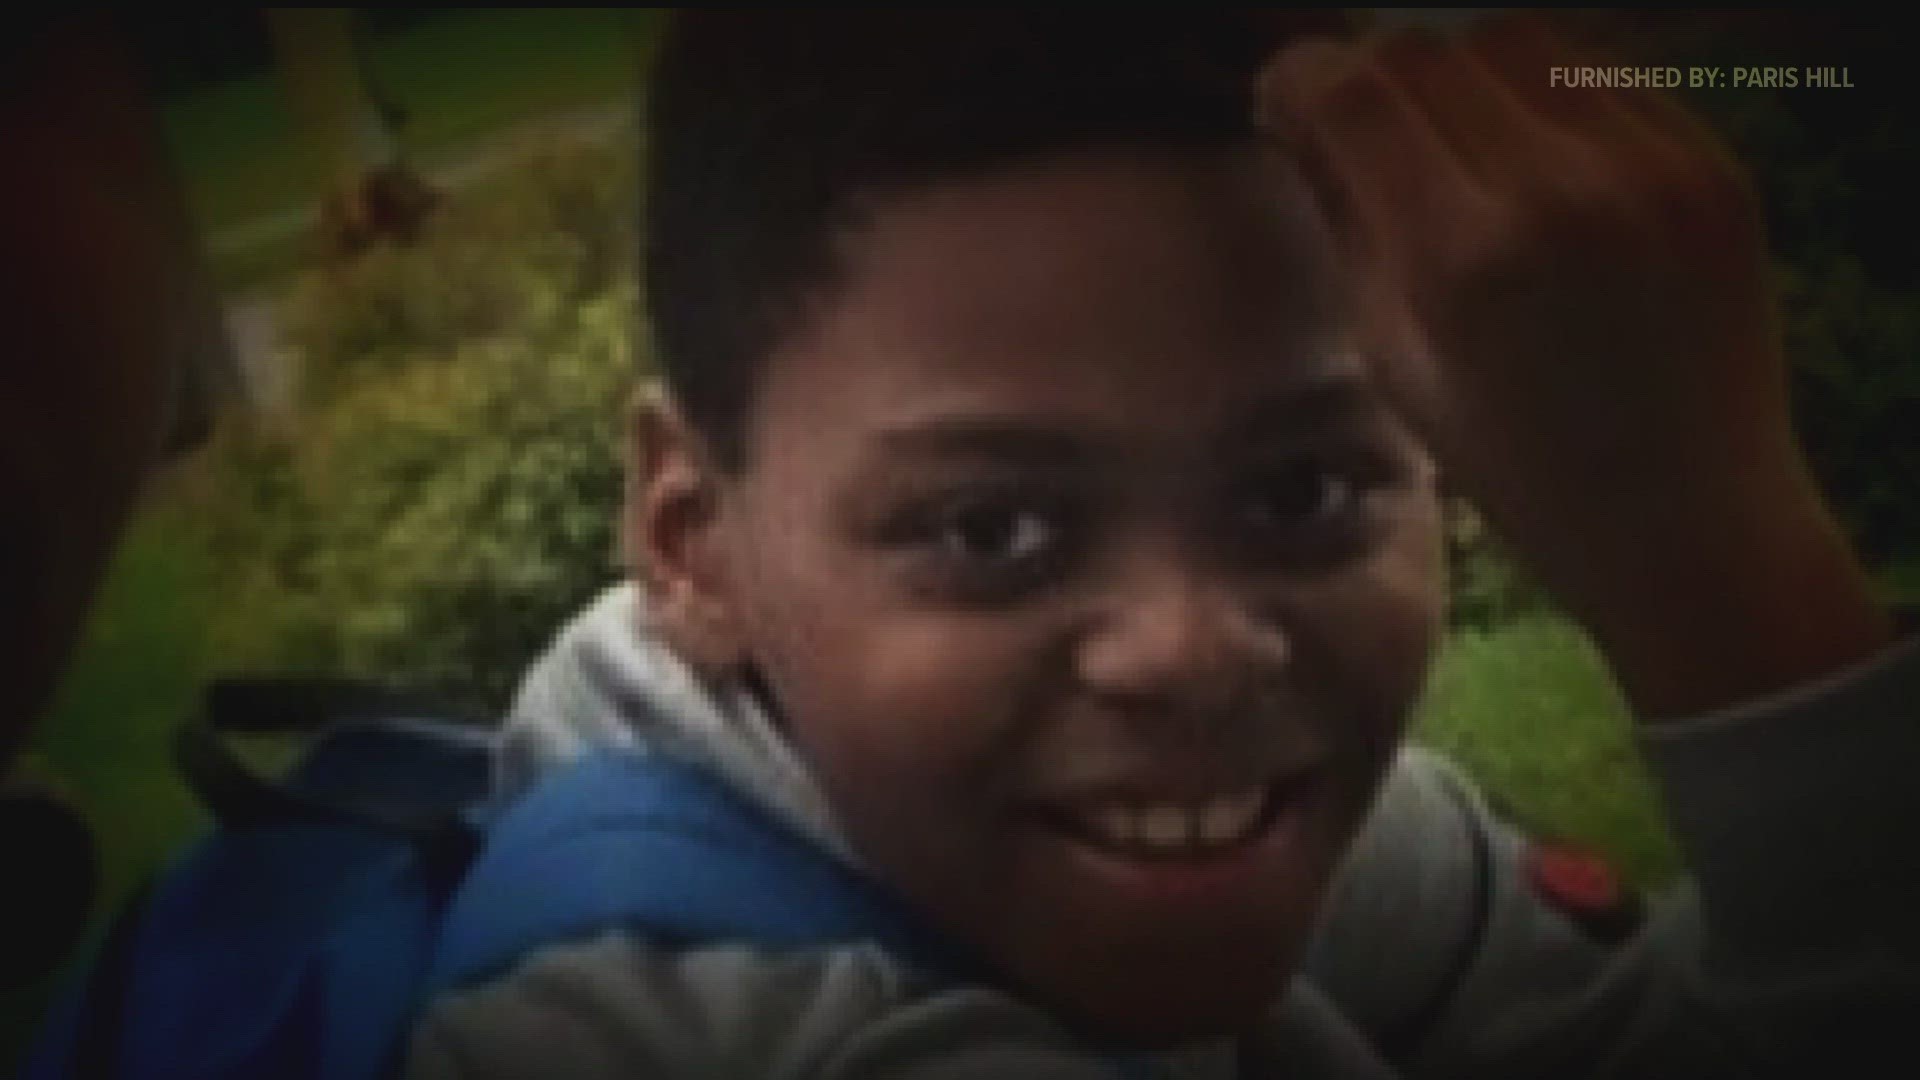 A judge sentenced Jeremiah Marquise Grady to 30 years for the 2021 murder of 12-year-old London Bean.